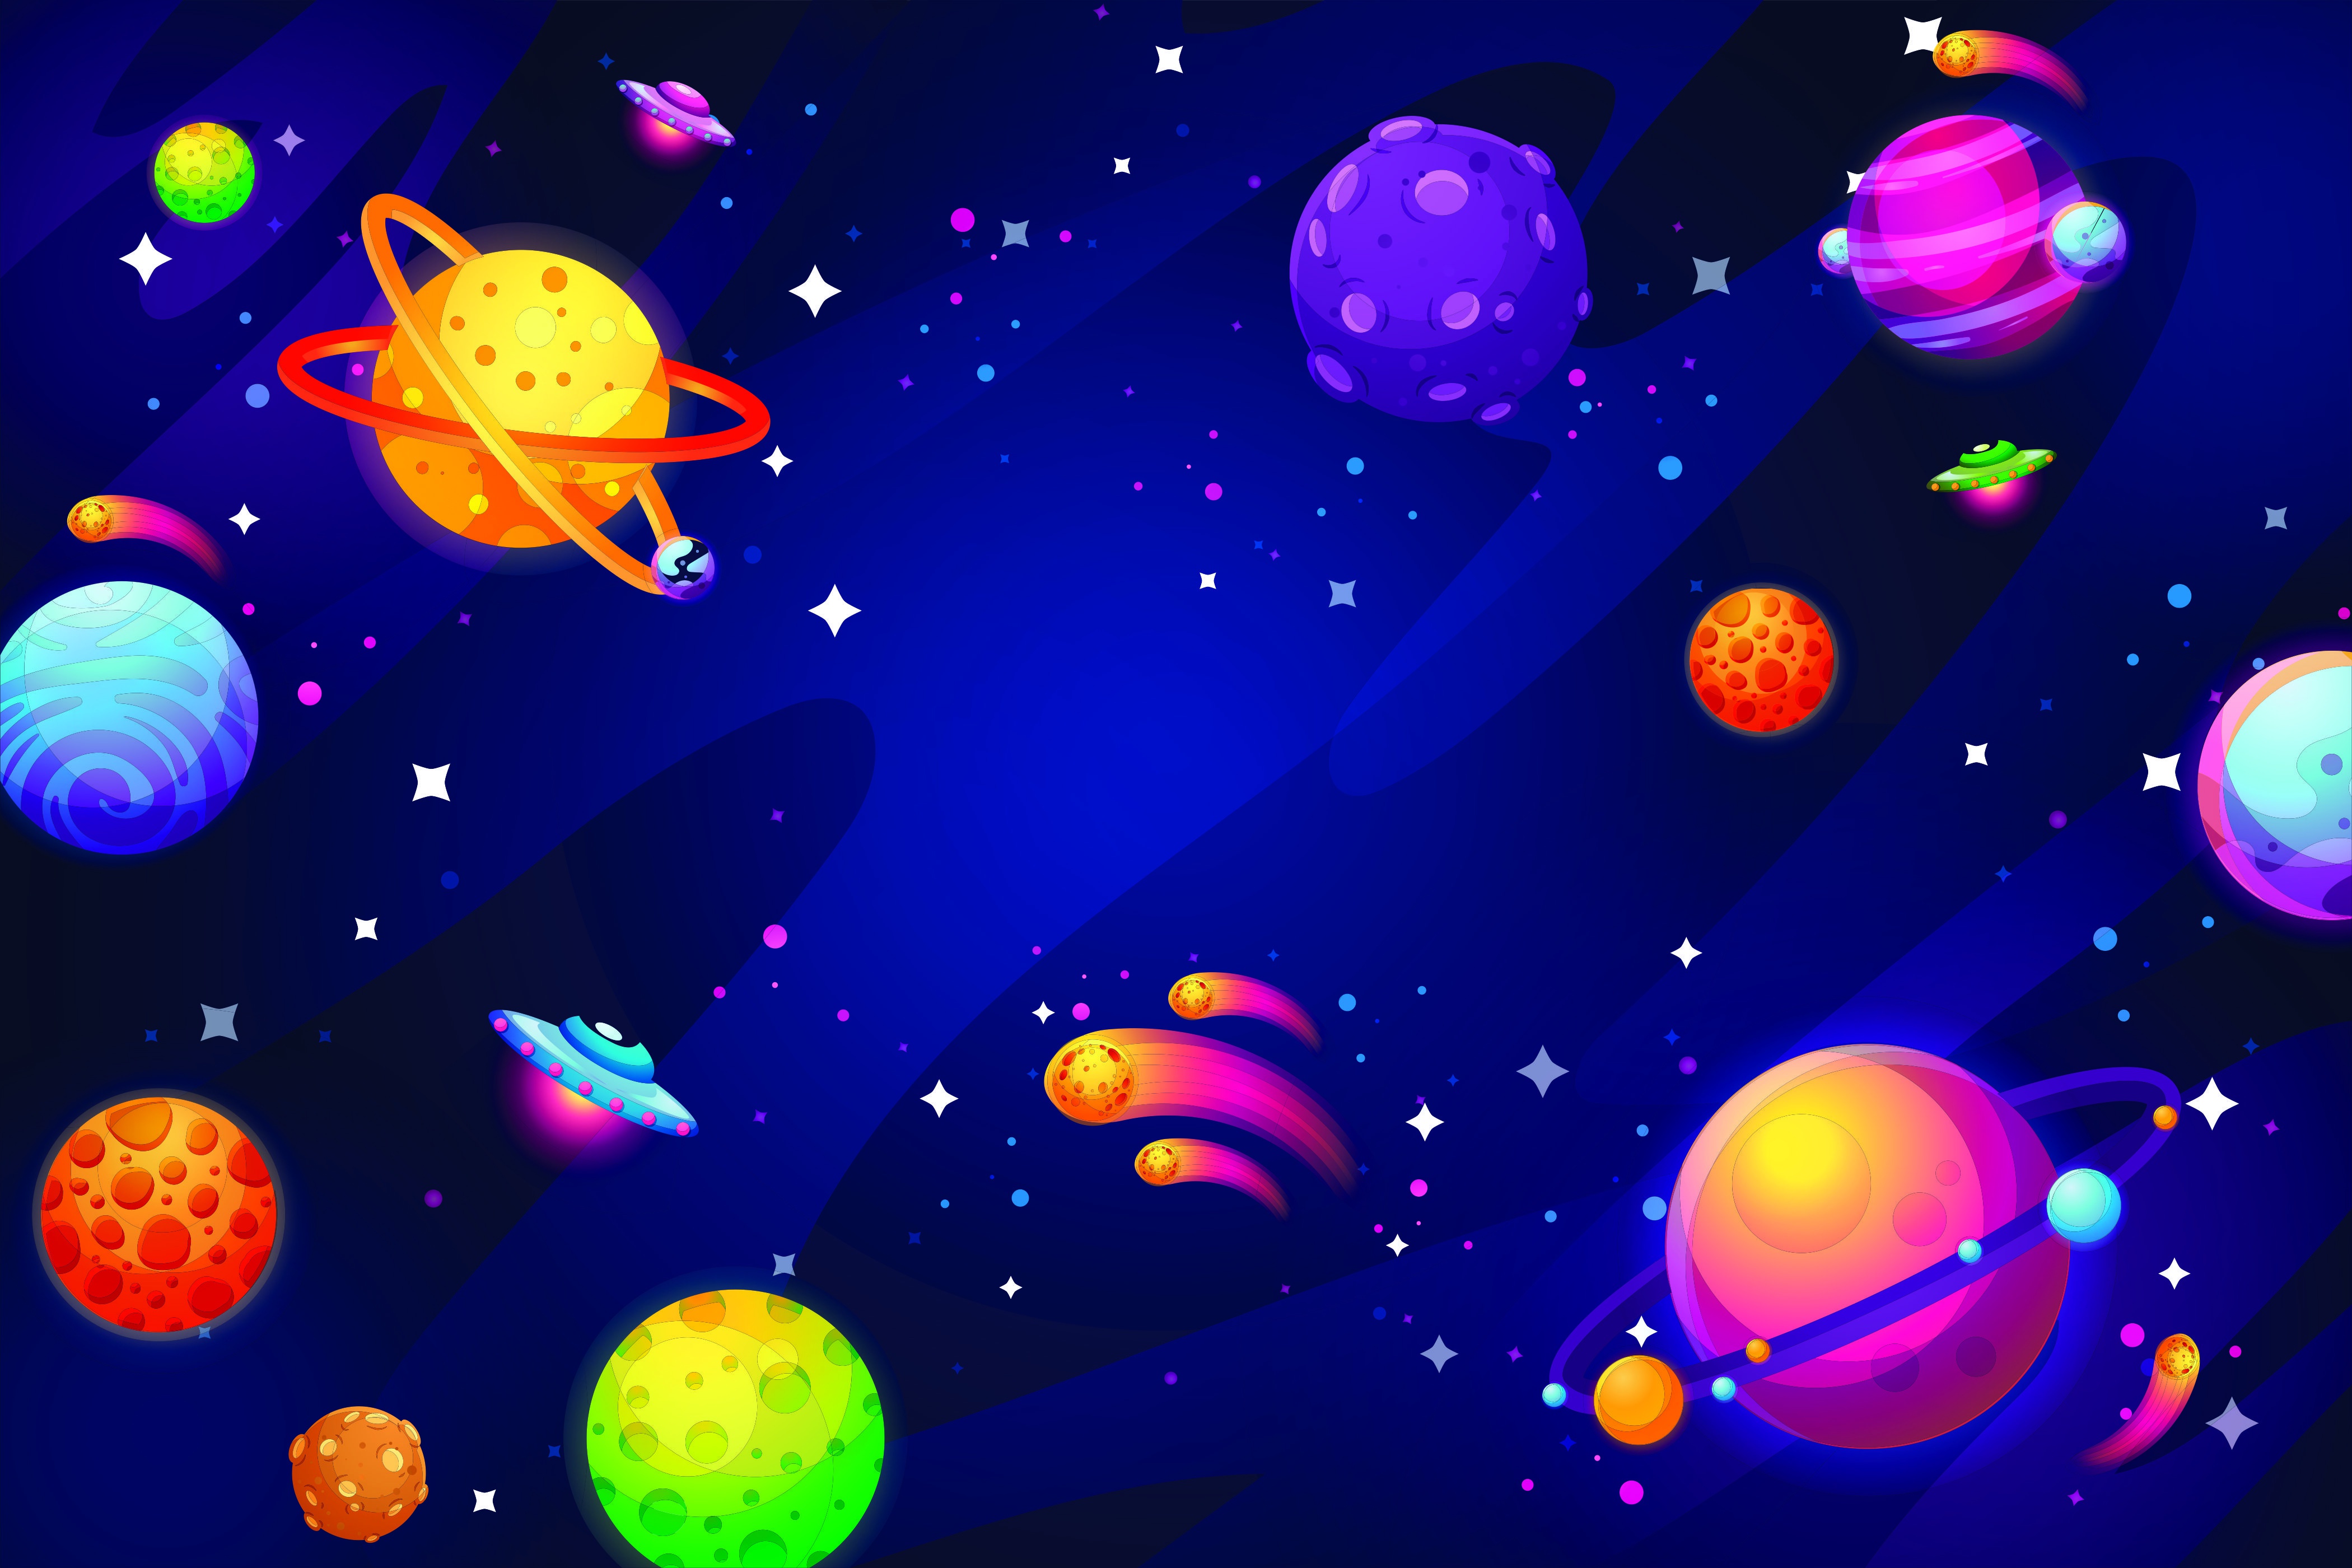 Digital Digital Art Artwork Science Fiction Colorful Space Planet UFO UFOs Spaceship Spacescapes Sta 4200x2800